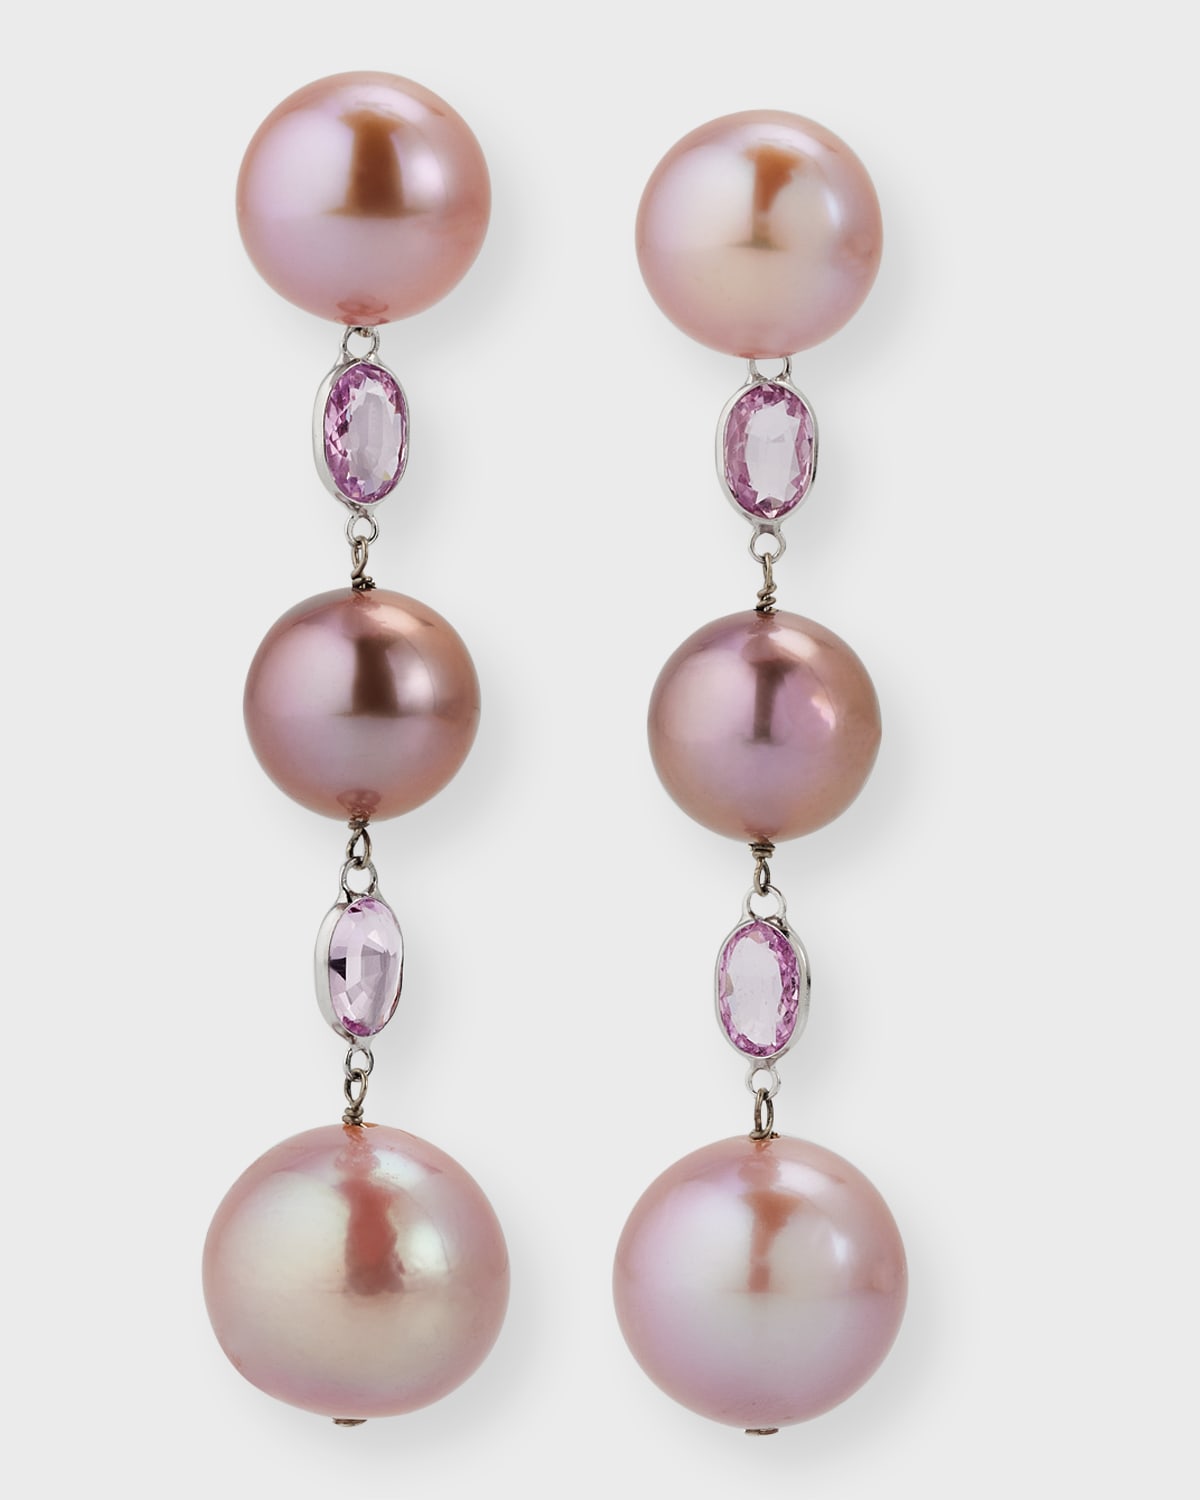 18K White Gold Kasumiga Pearl and Pink Sapphire Earrings